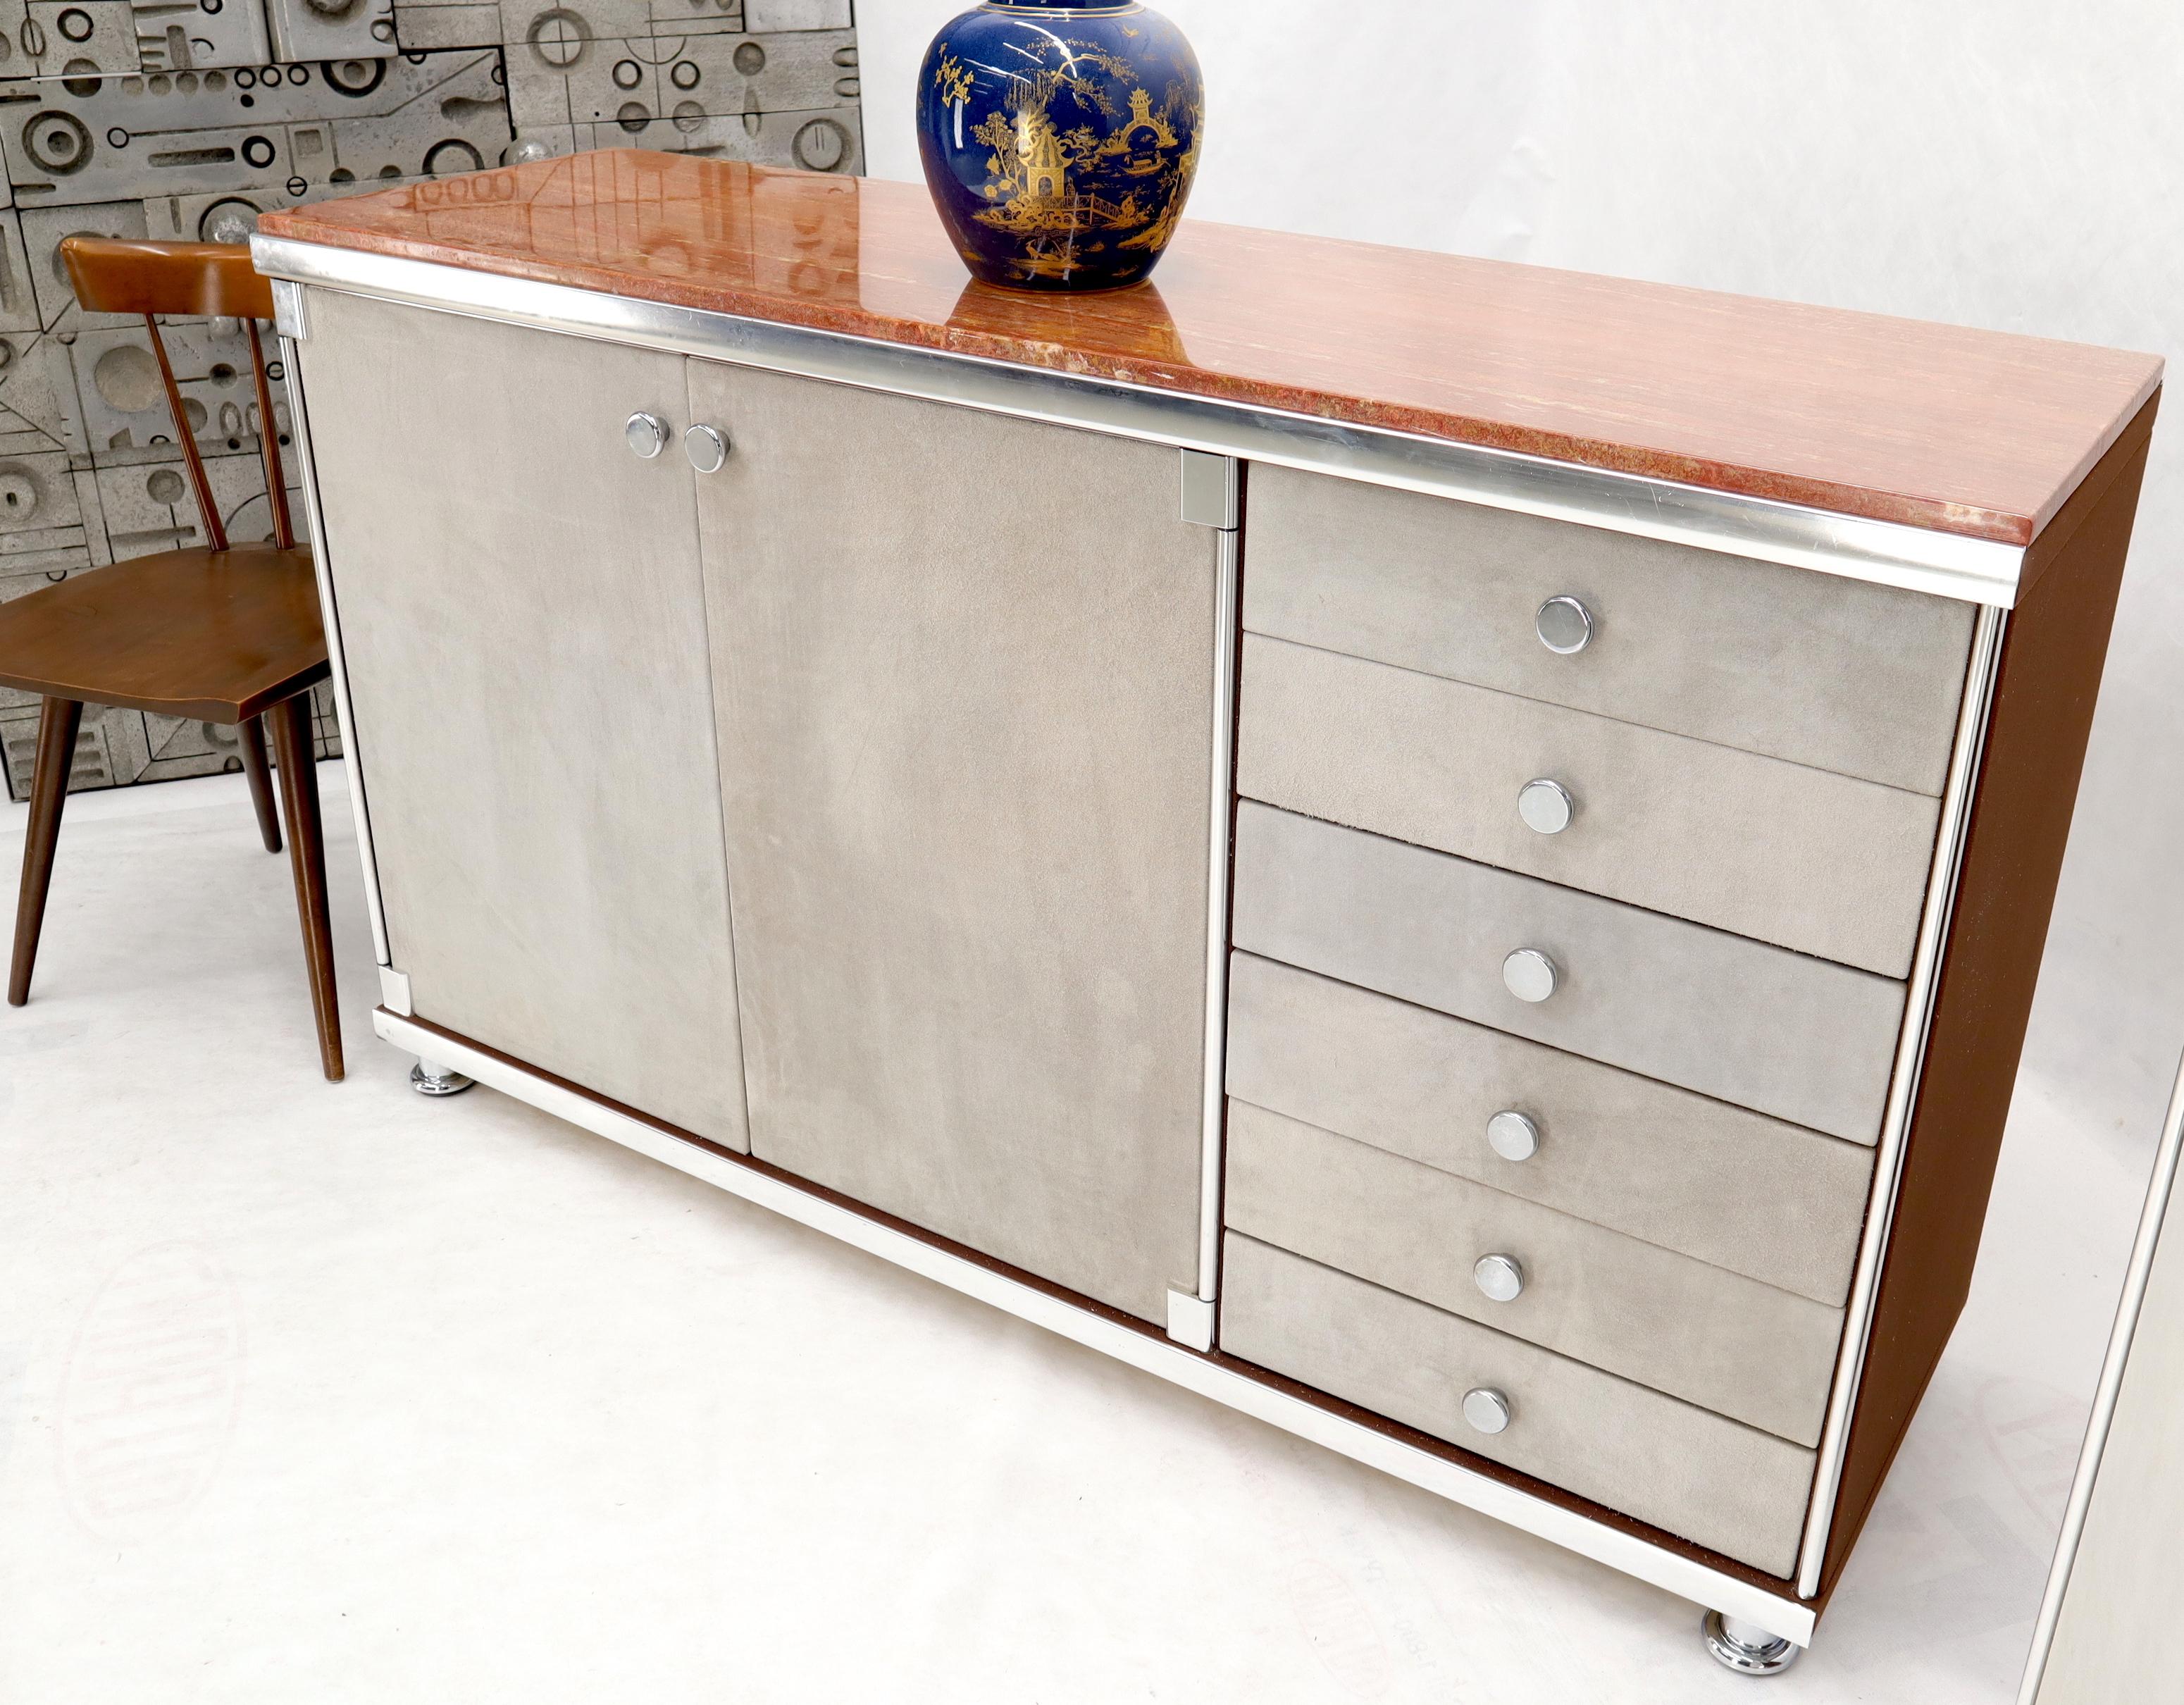 Pair of Mid-Century Modern marble-top dressers finished in grey real suede leather by Guido Faleschini for Mariani. High quality gloss finish vivid rouge color marble tops. Lots of space in the compartments and six 6 drawers.